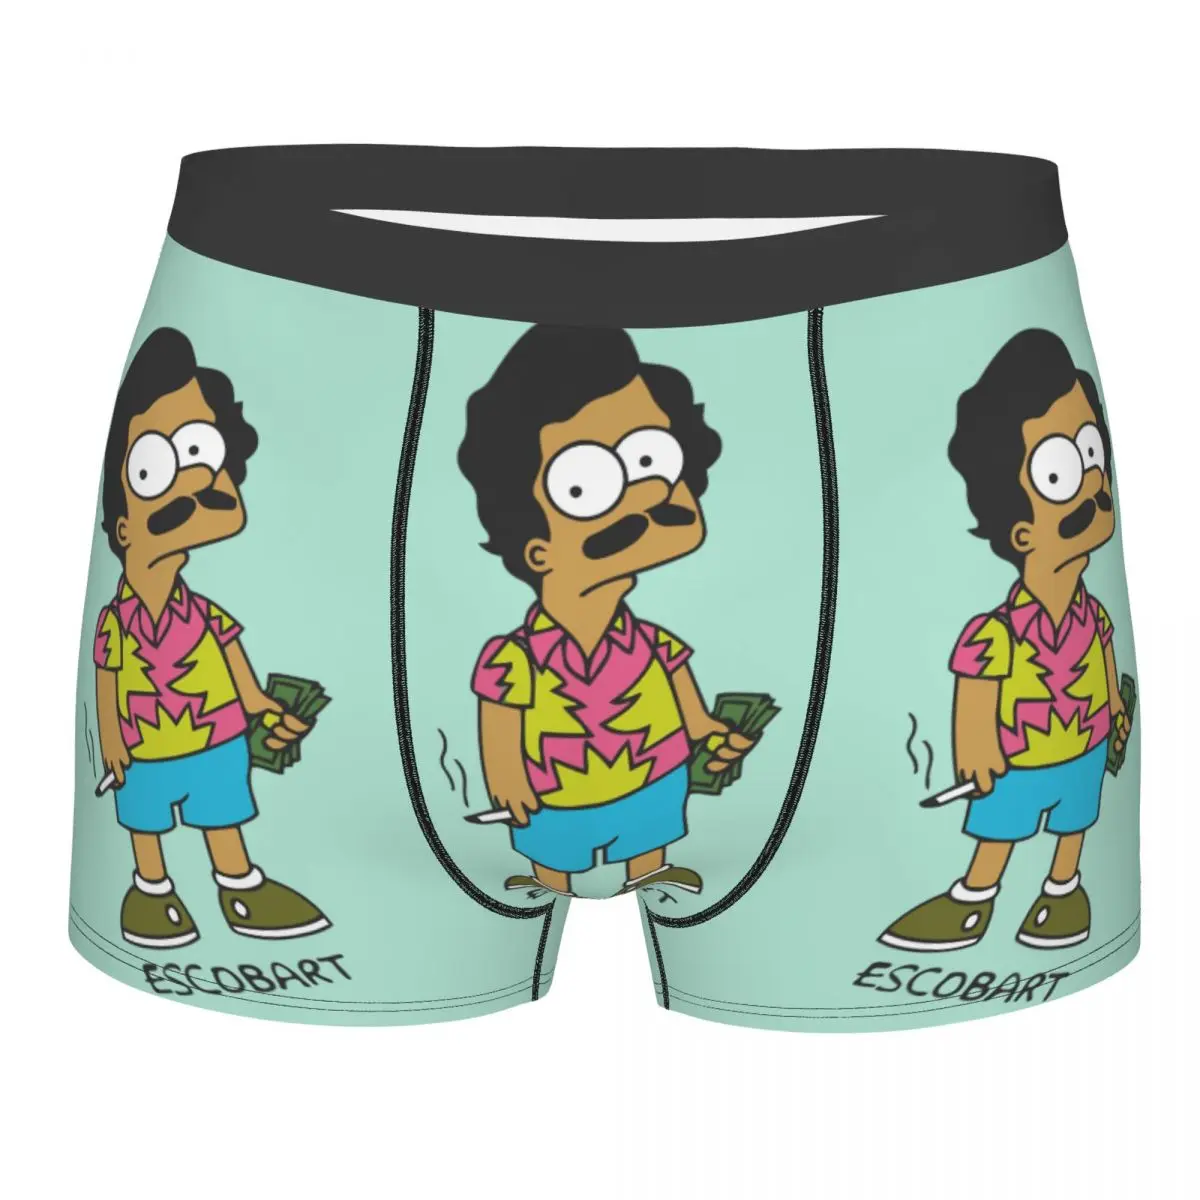 Escobart Man's Printed Boxer Briefs Underpants Highly Breathable Top Quality Birthday Gifts